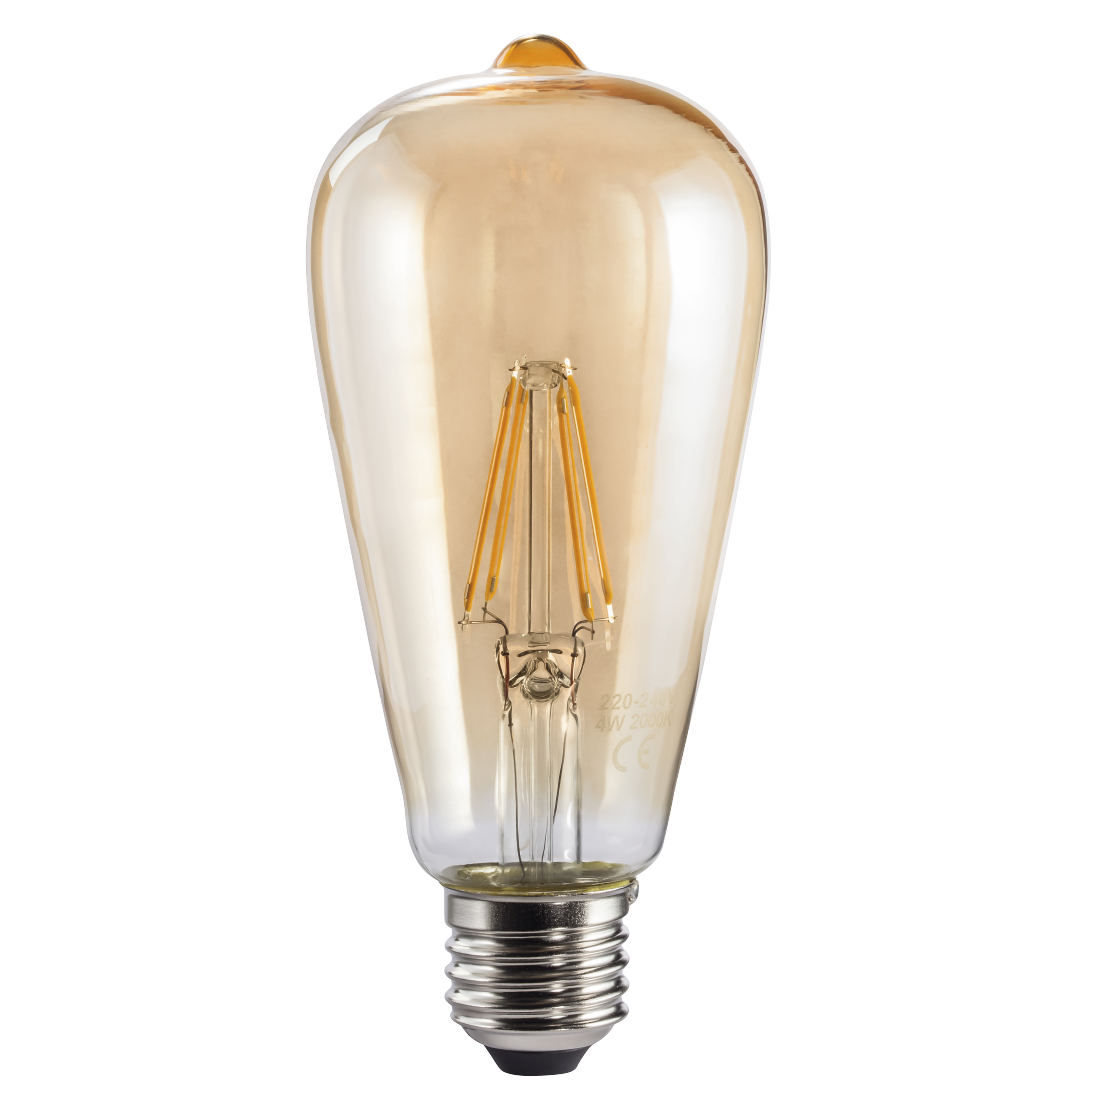 abx High-Res Image - Xavax, LED Filament, E27, 400lm replaces 35W, vintage bulb, warm white